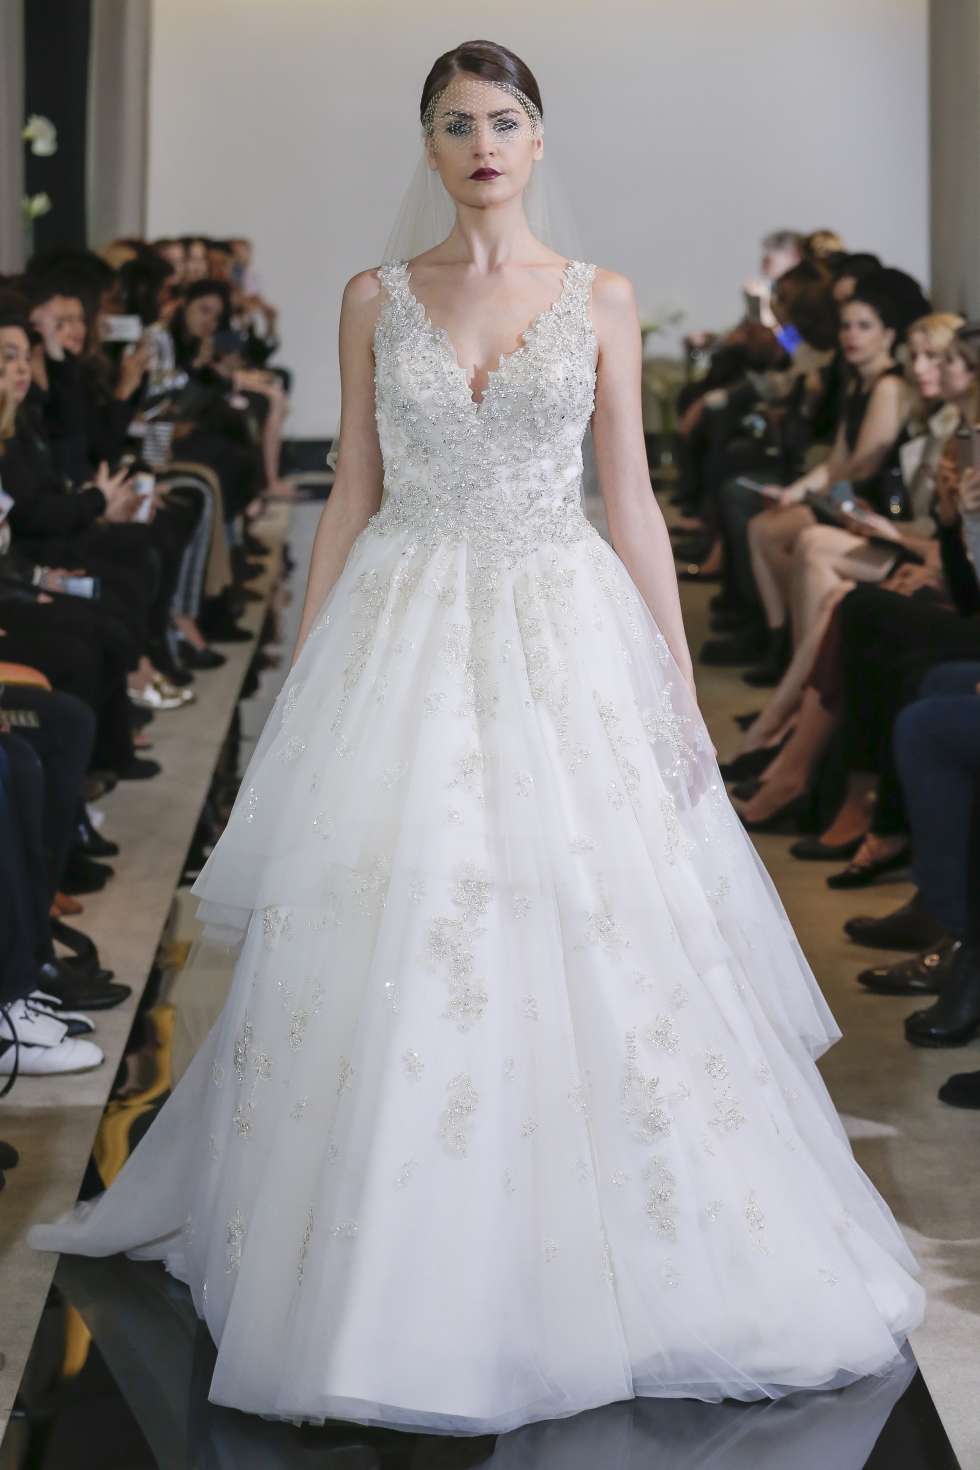 The Unique Justin Alexander Bridal Collection for Spring/Summer 2018